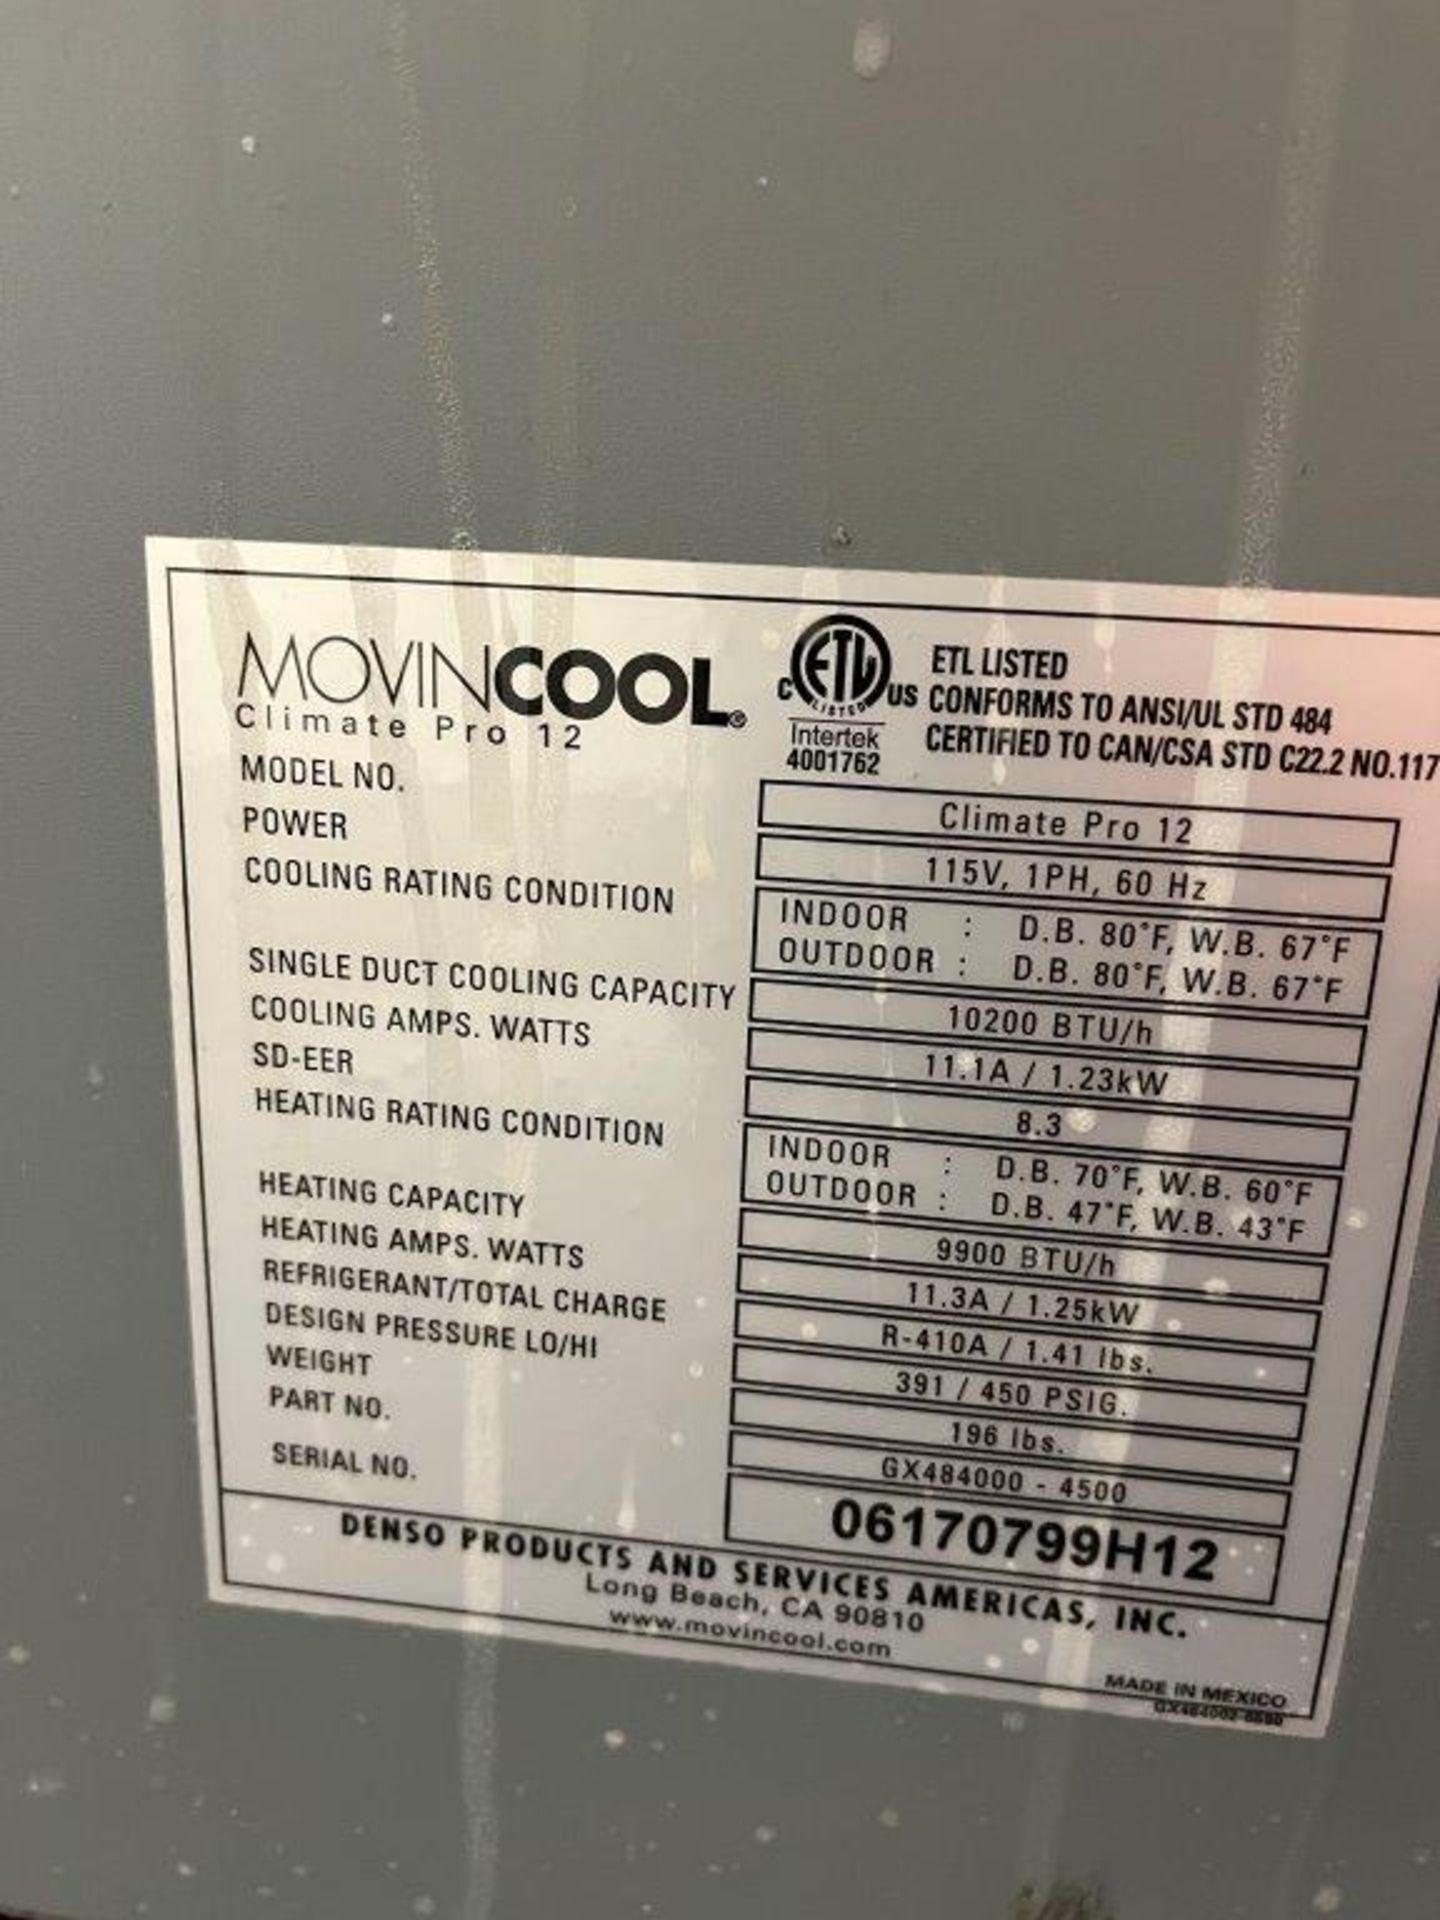 Denso Movincool Climate Pro 18 Mobile Cool/Heat Unit - Image 3 of 3